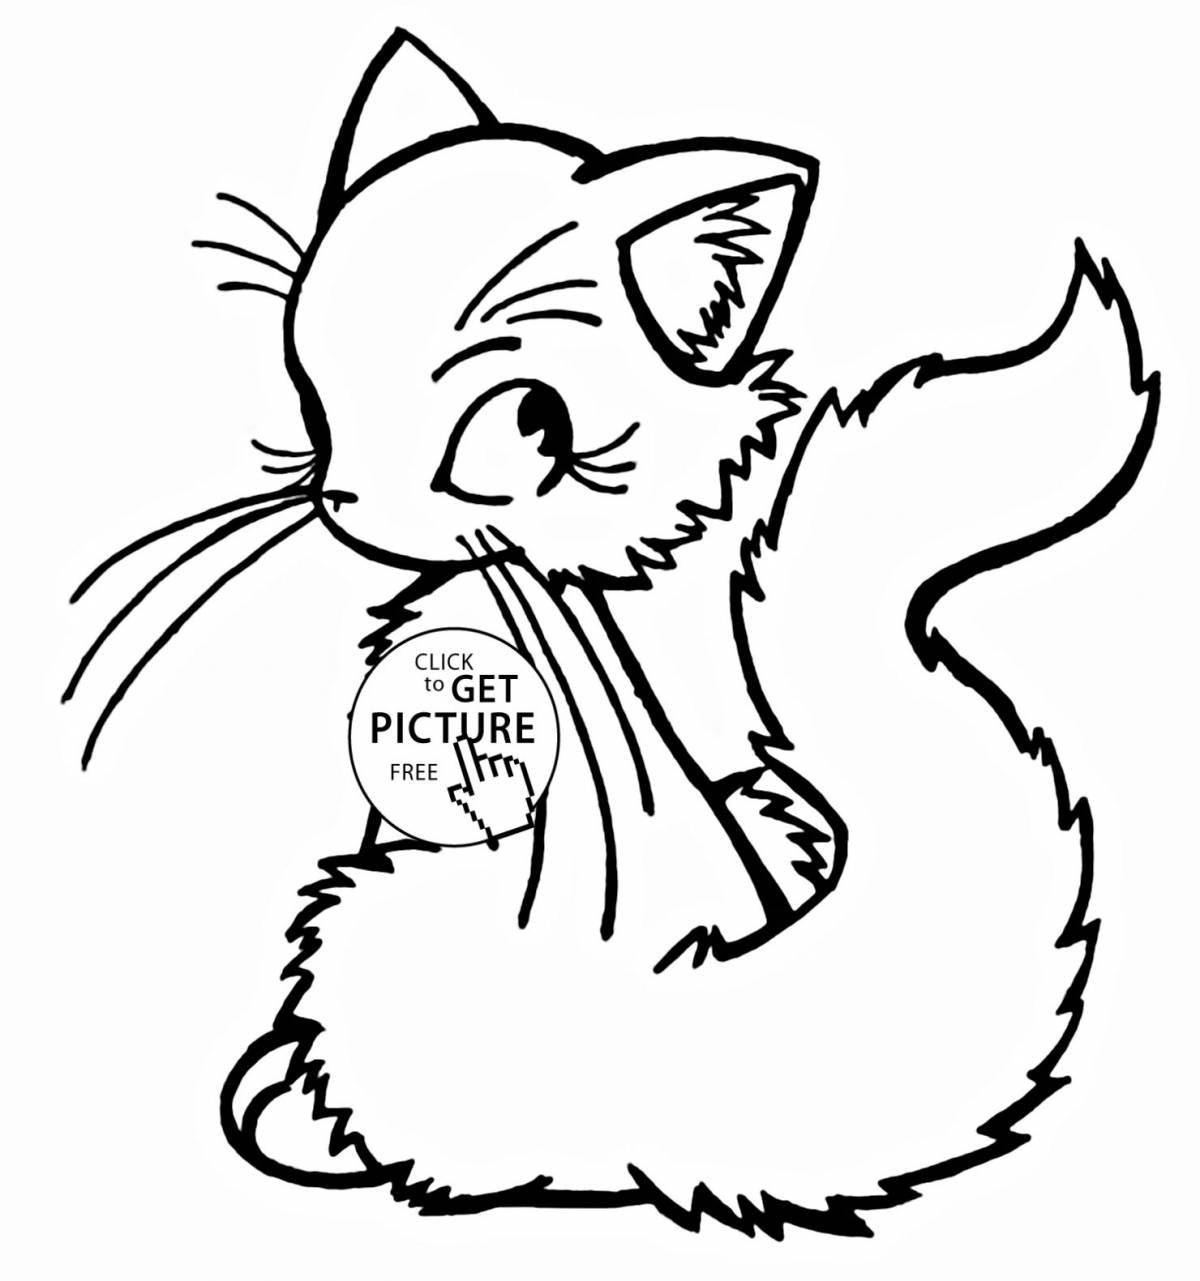 Violent cat new year coloring book